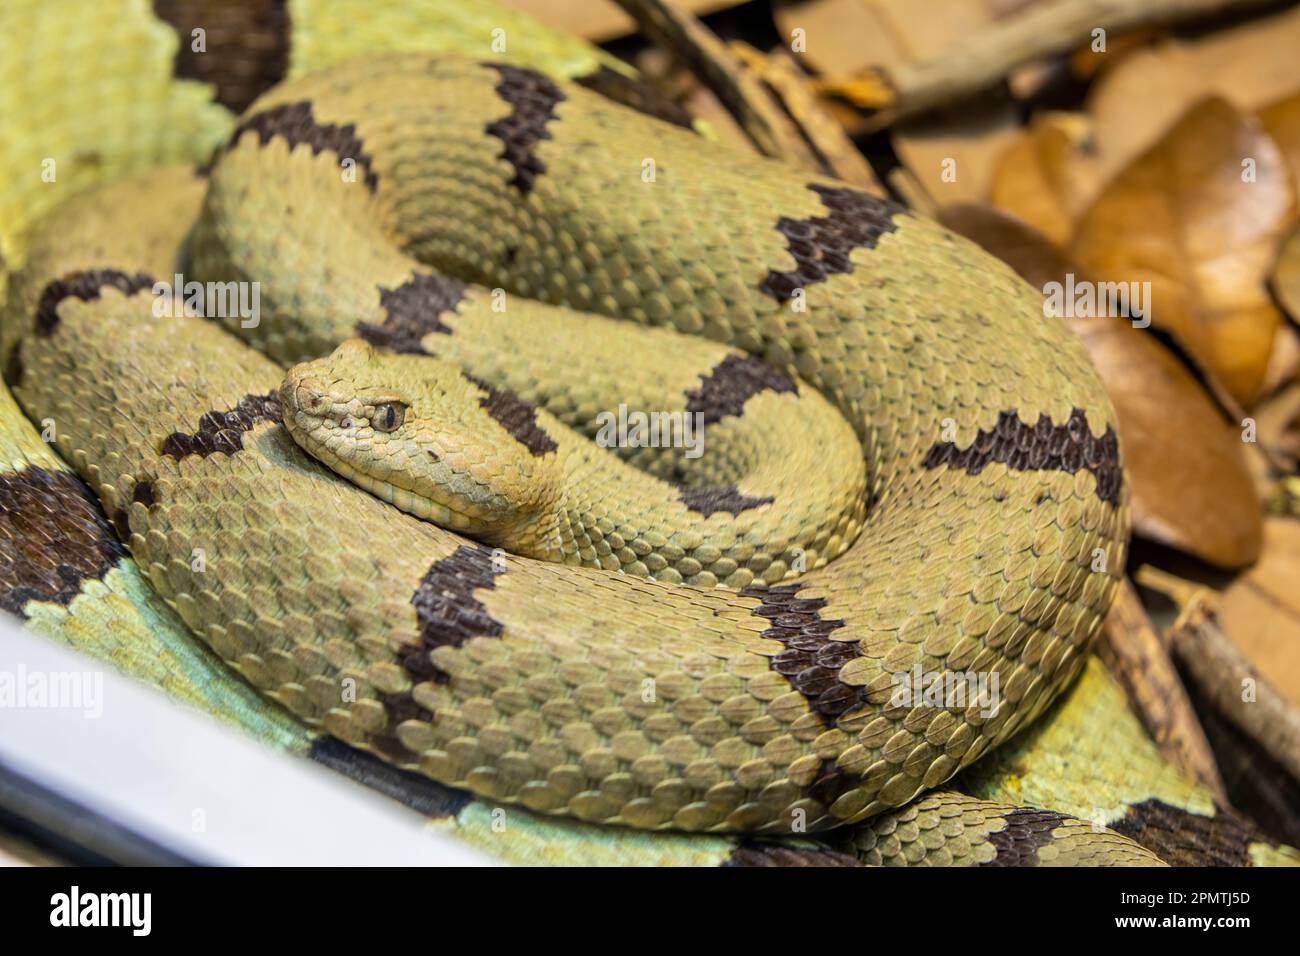 rock rattlesnake (Crotalus lepidus) is a venomous pit viper species found in the southwestern United States and northern central Mexico. Stock Photo